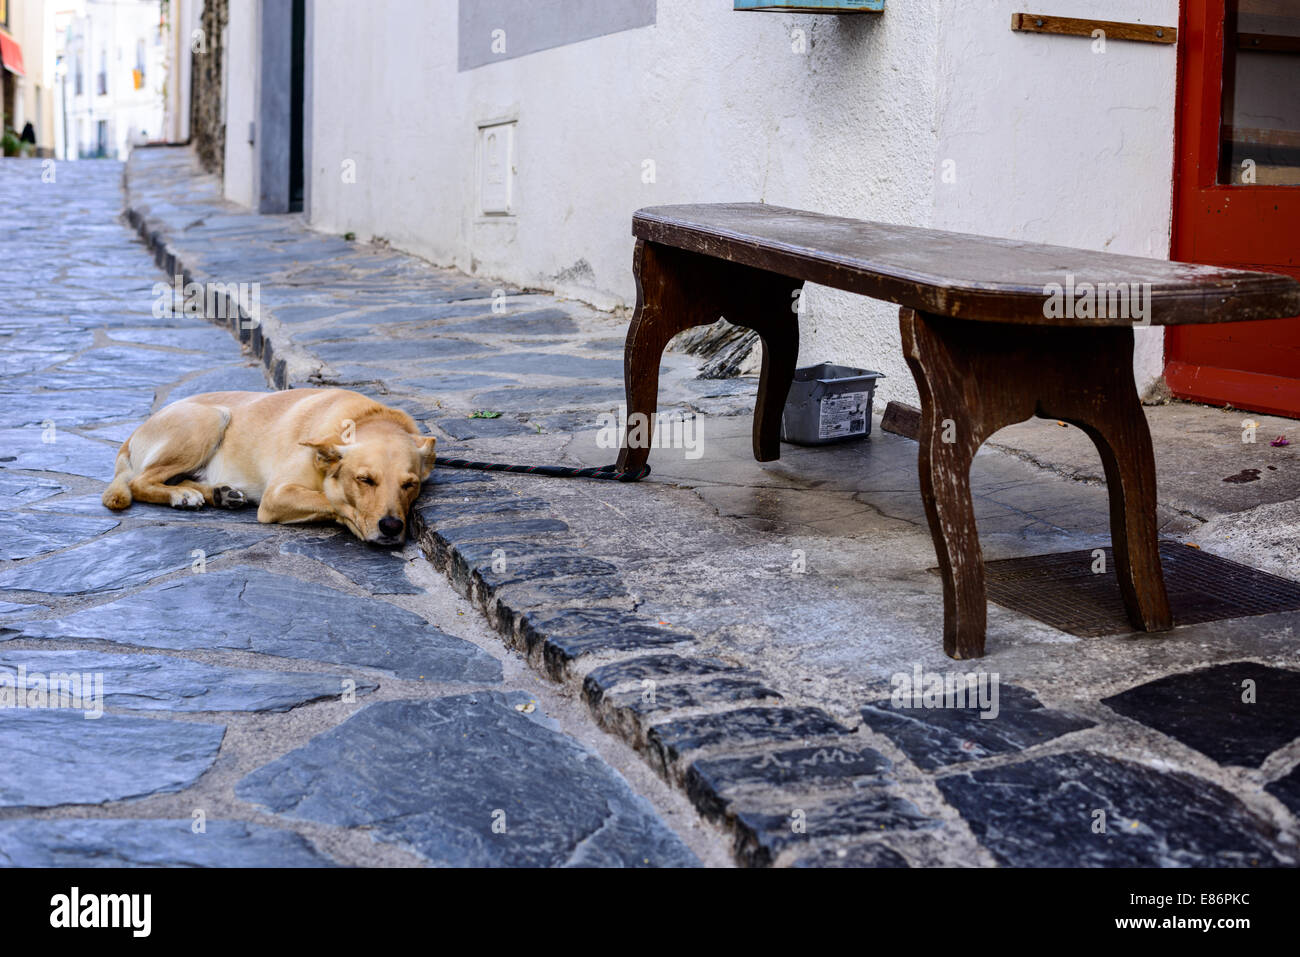 A dog sleeps on the street, depicting the small town charm of Cadaques, in the Costa Brava. Stock Photo